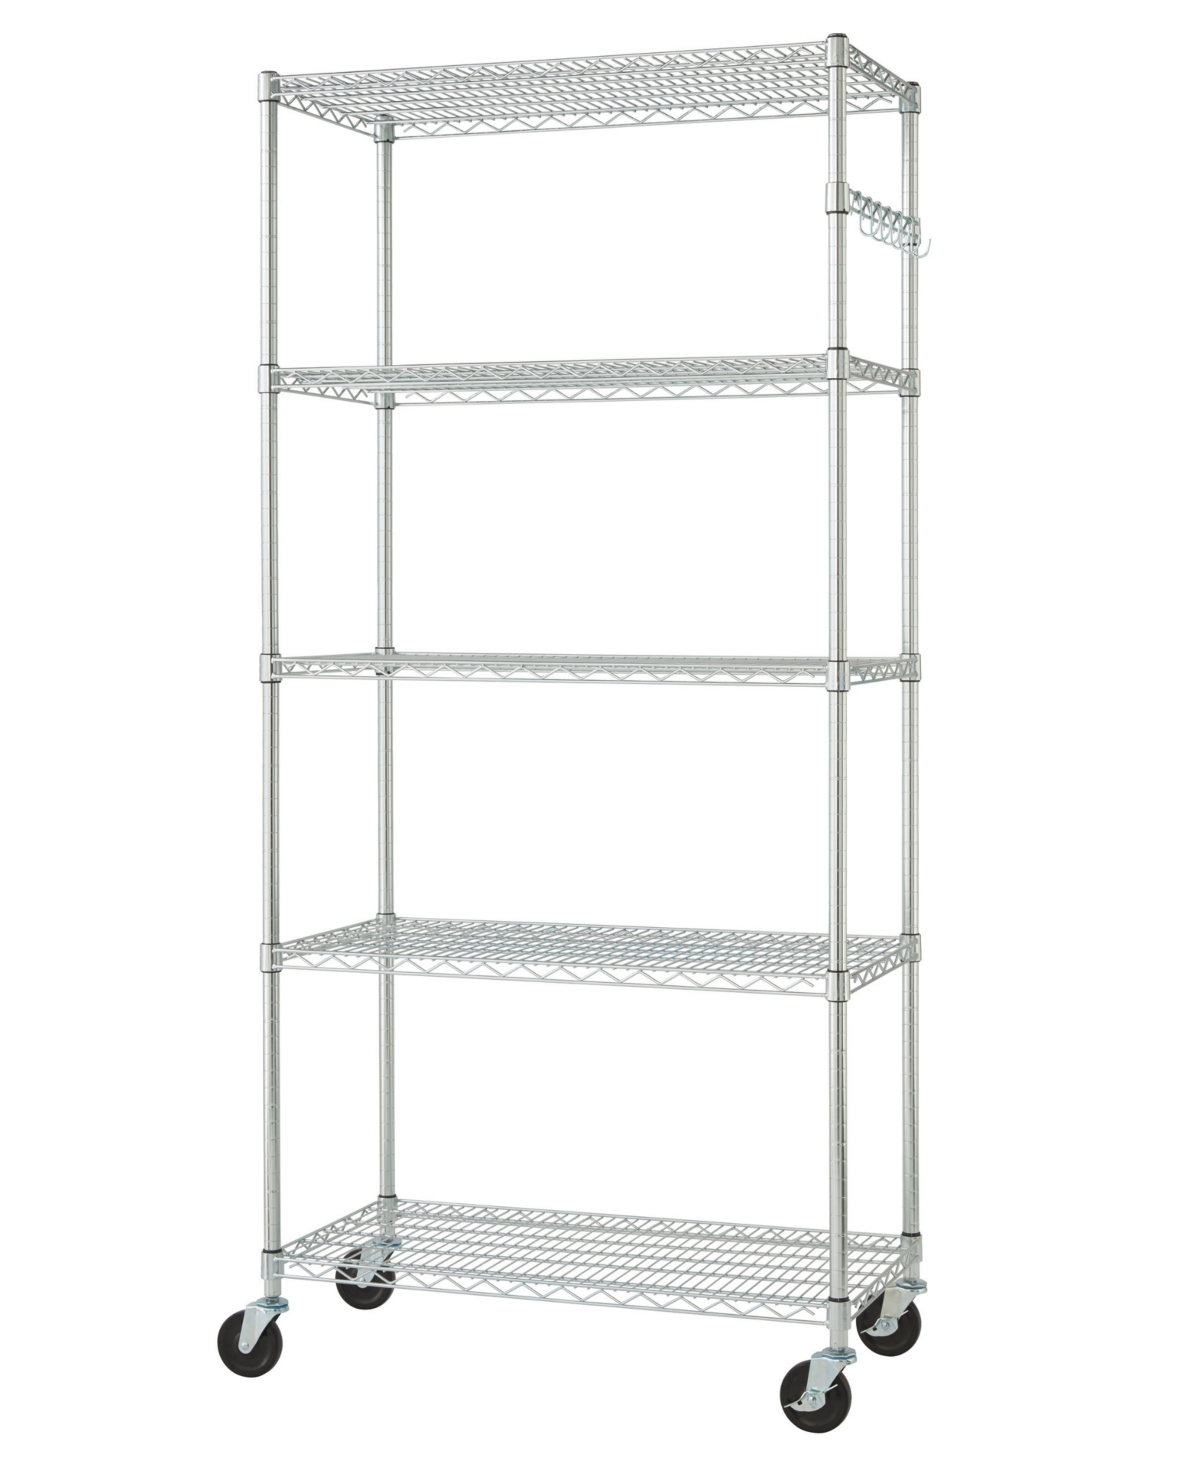 5-Tier Wire Shelving Rack Includes Wheels - Chrome